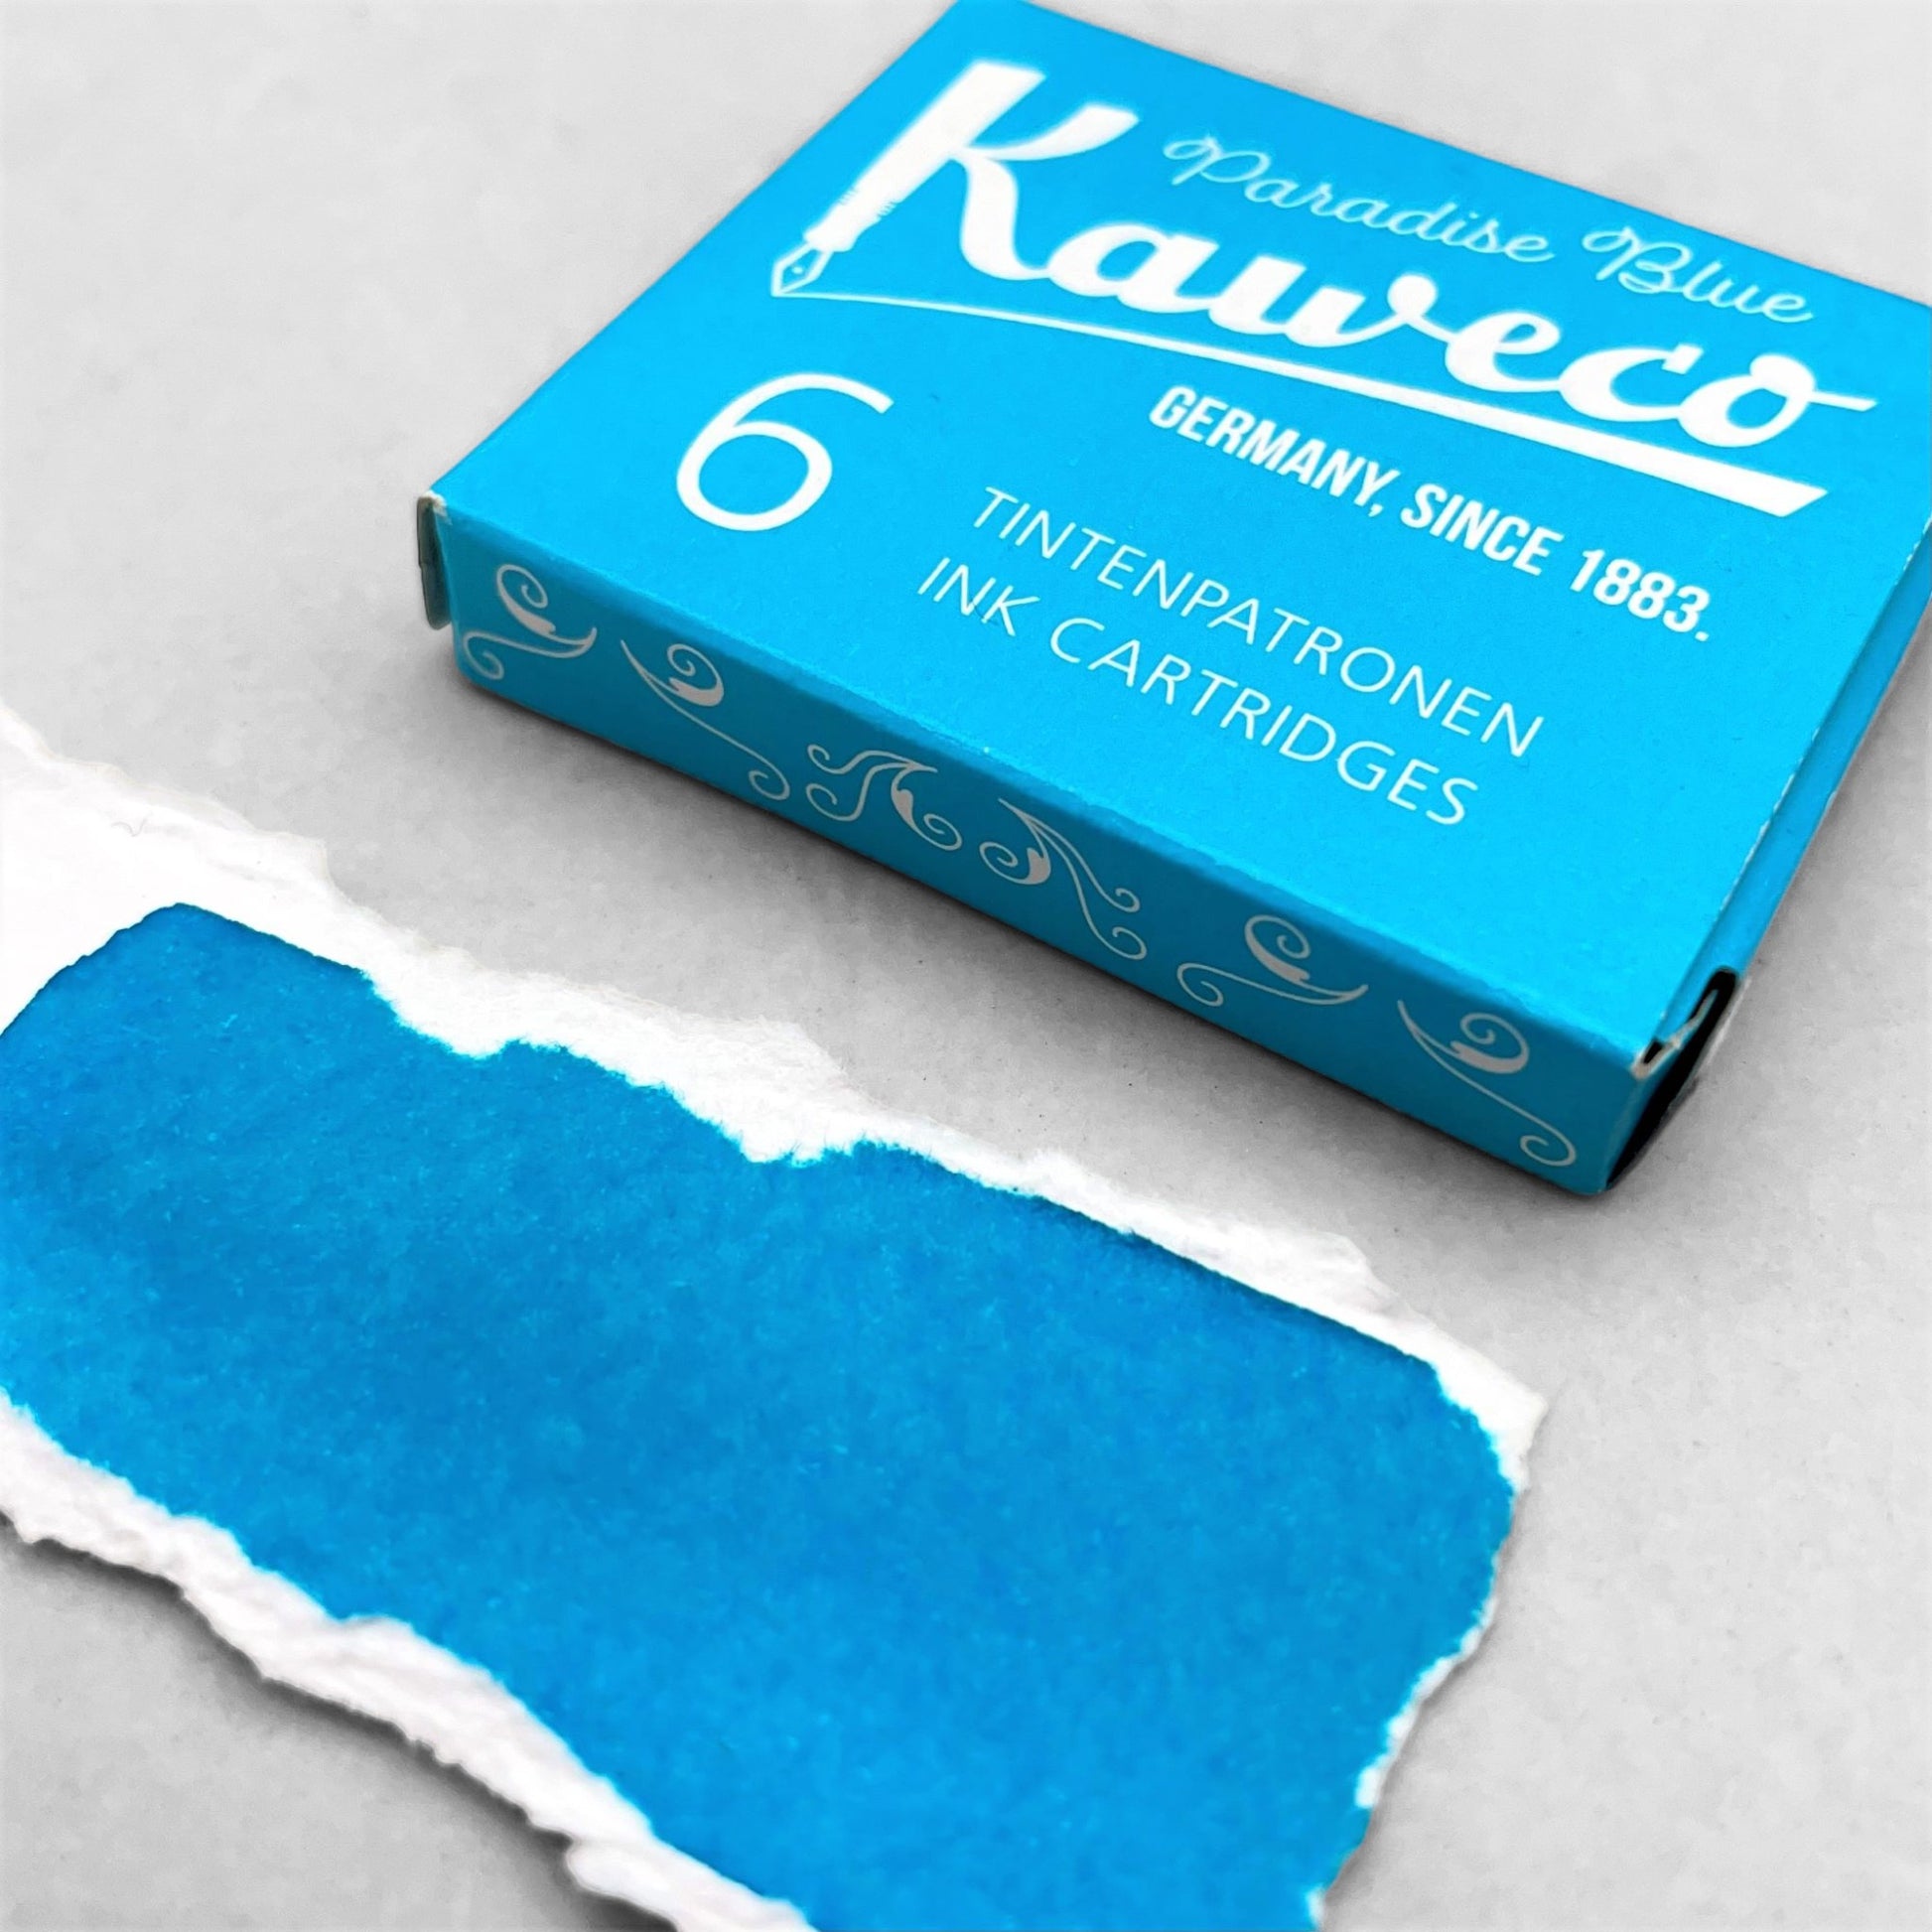 Box of 6 ink cartridges by Kaweco in paradise blue colour